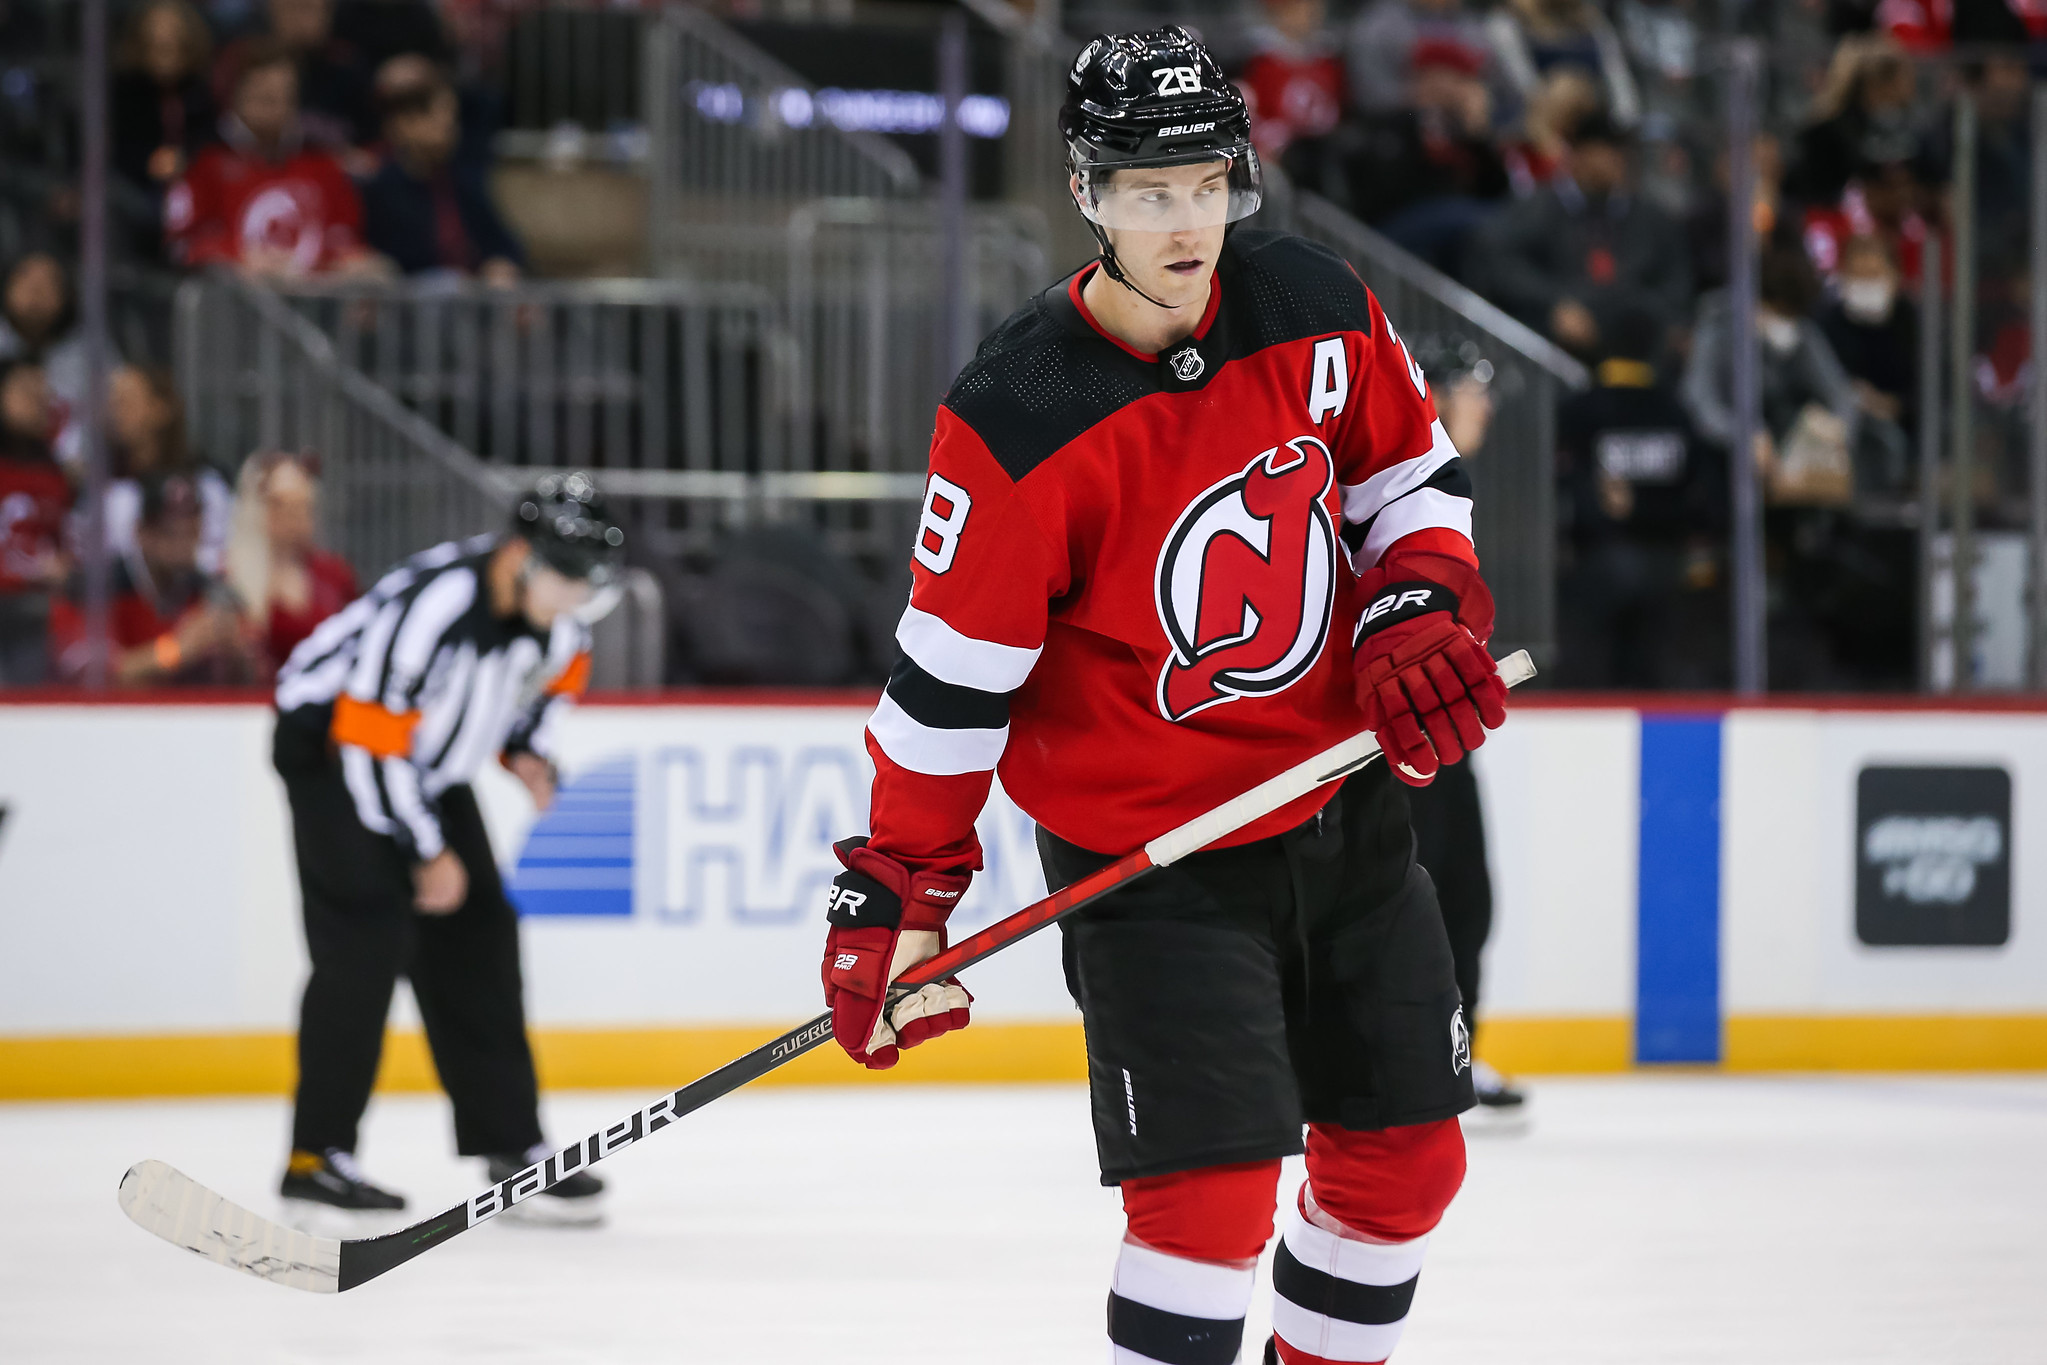 New Jersey Devils: Severson Wants to Stay After Career Season